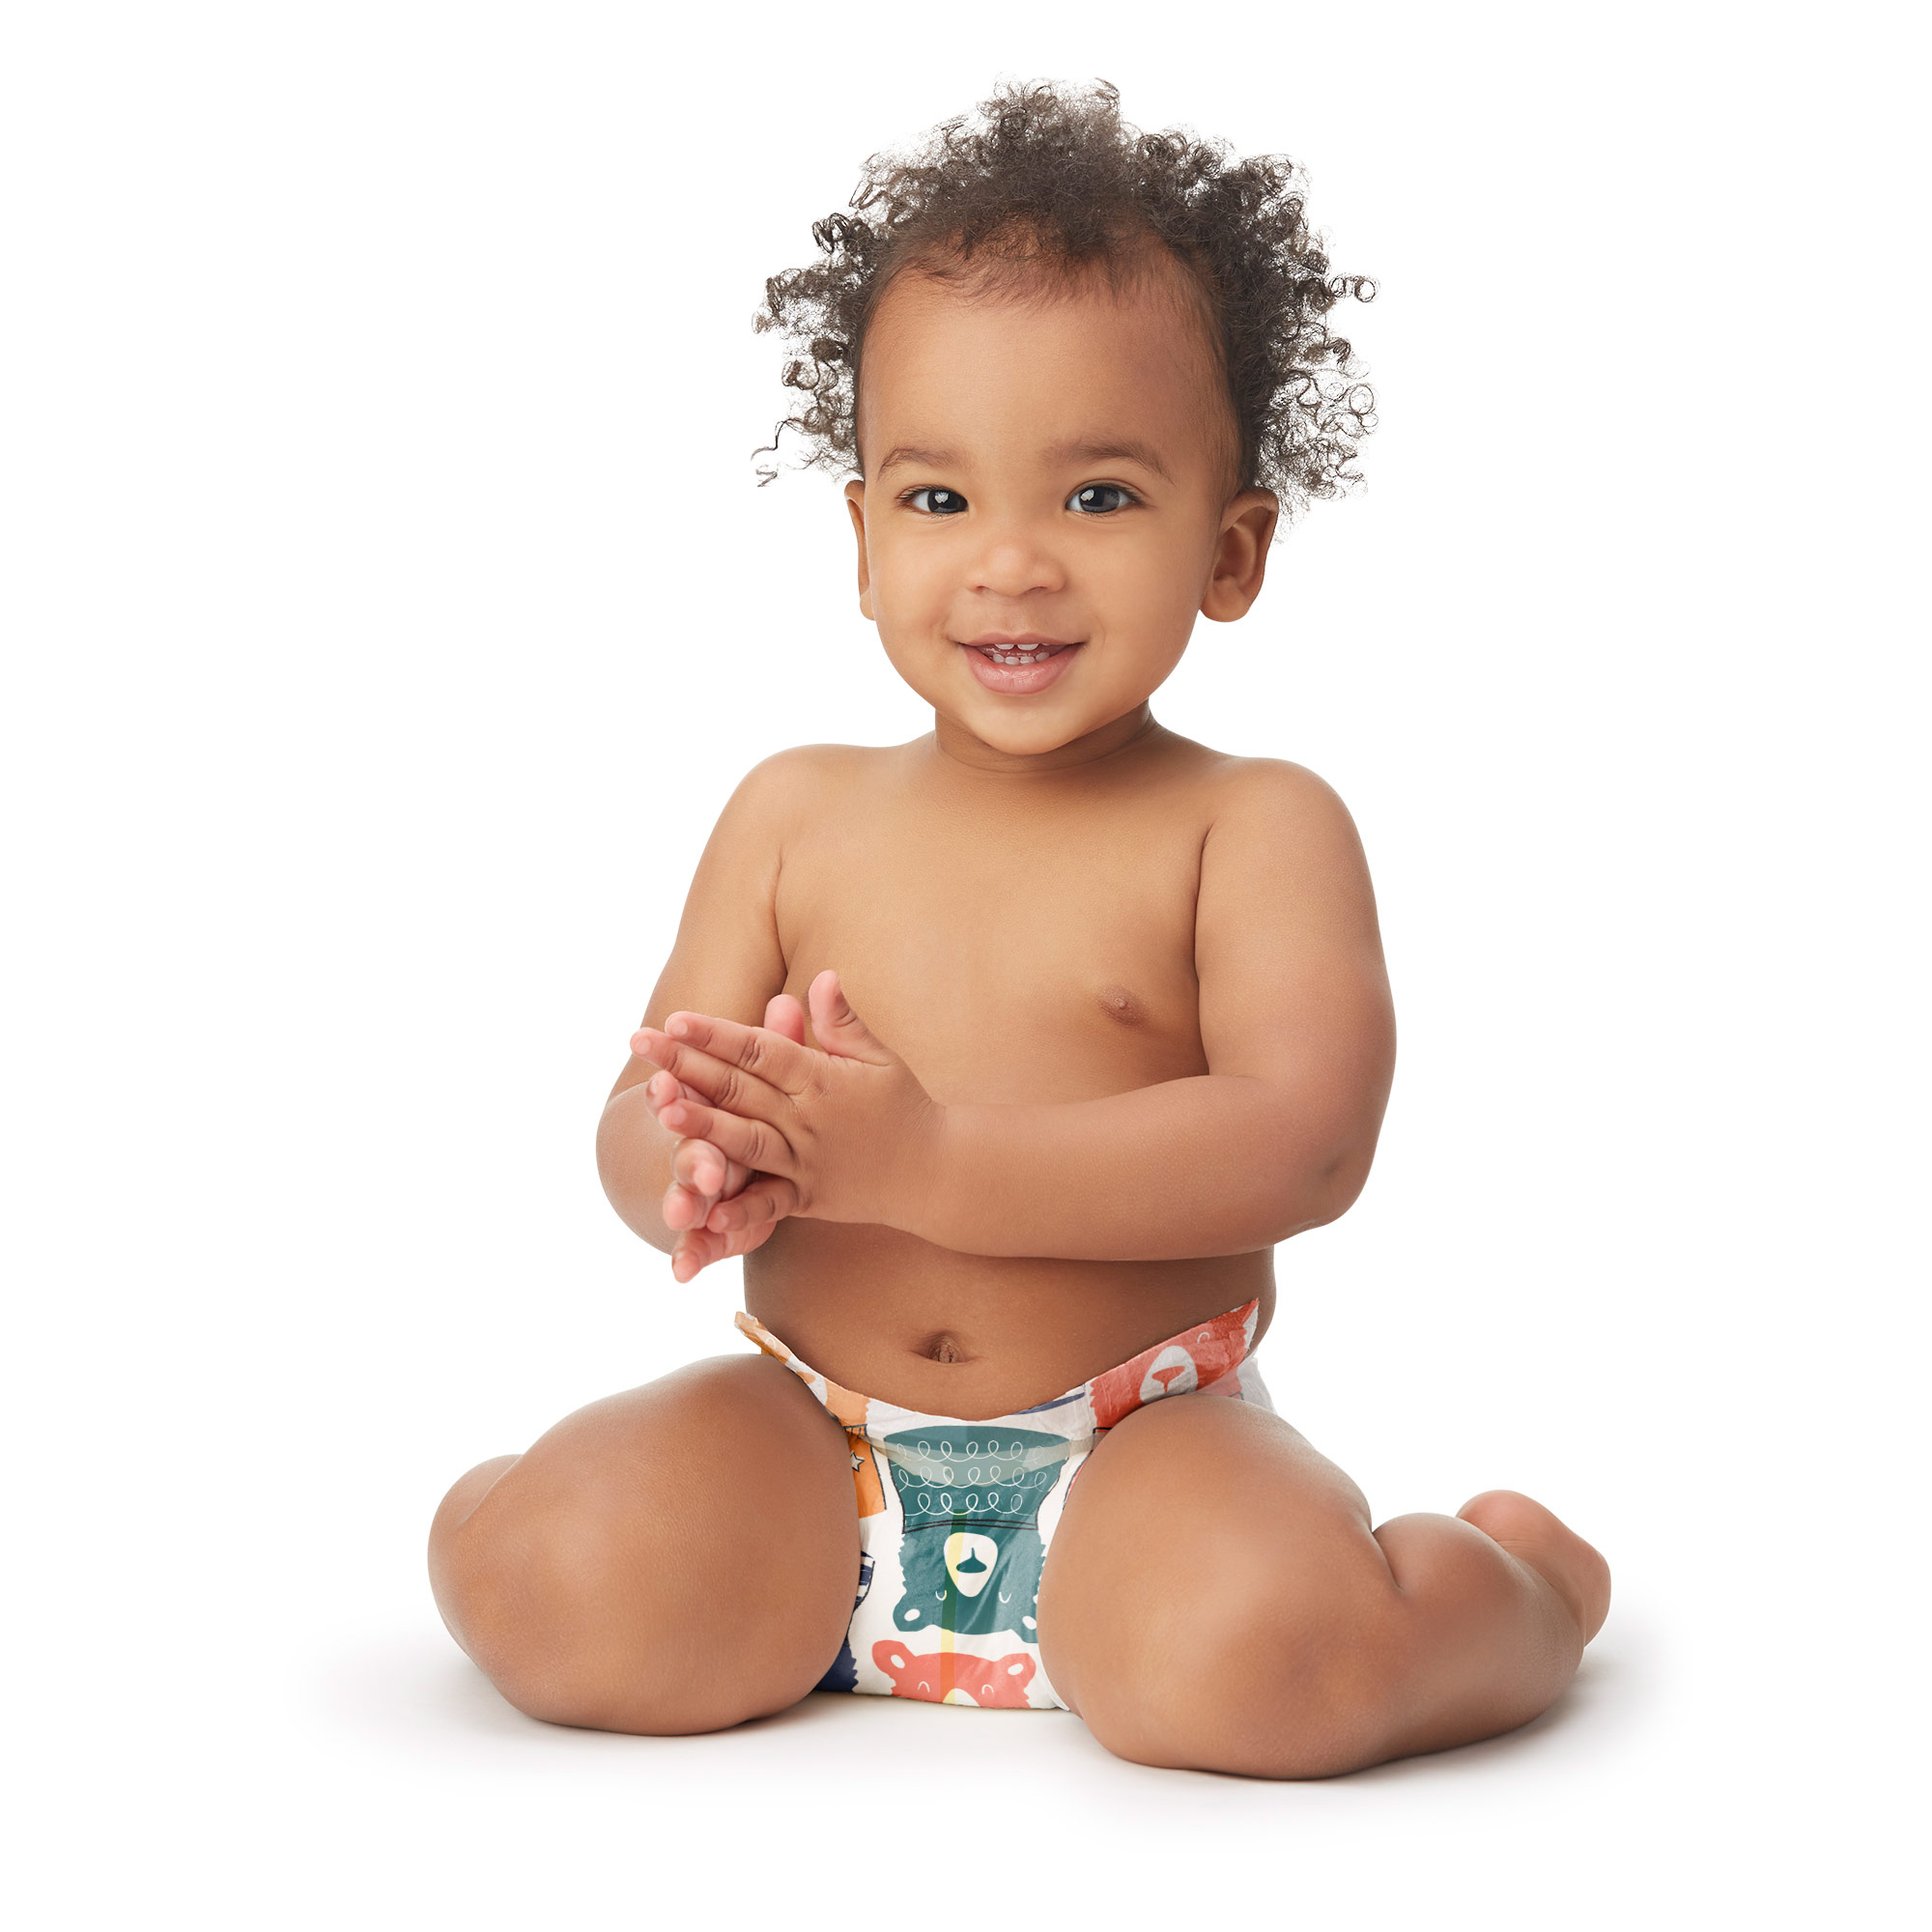 Honest Clean Conscious Baby Diaper, Beary Cool, Size 6, Advanced Leak protection, Plant-Based